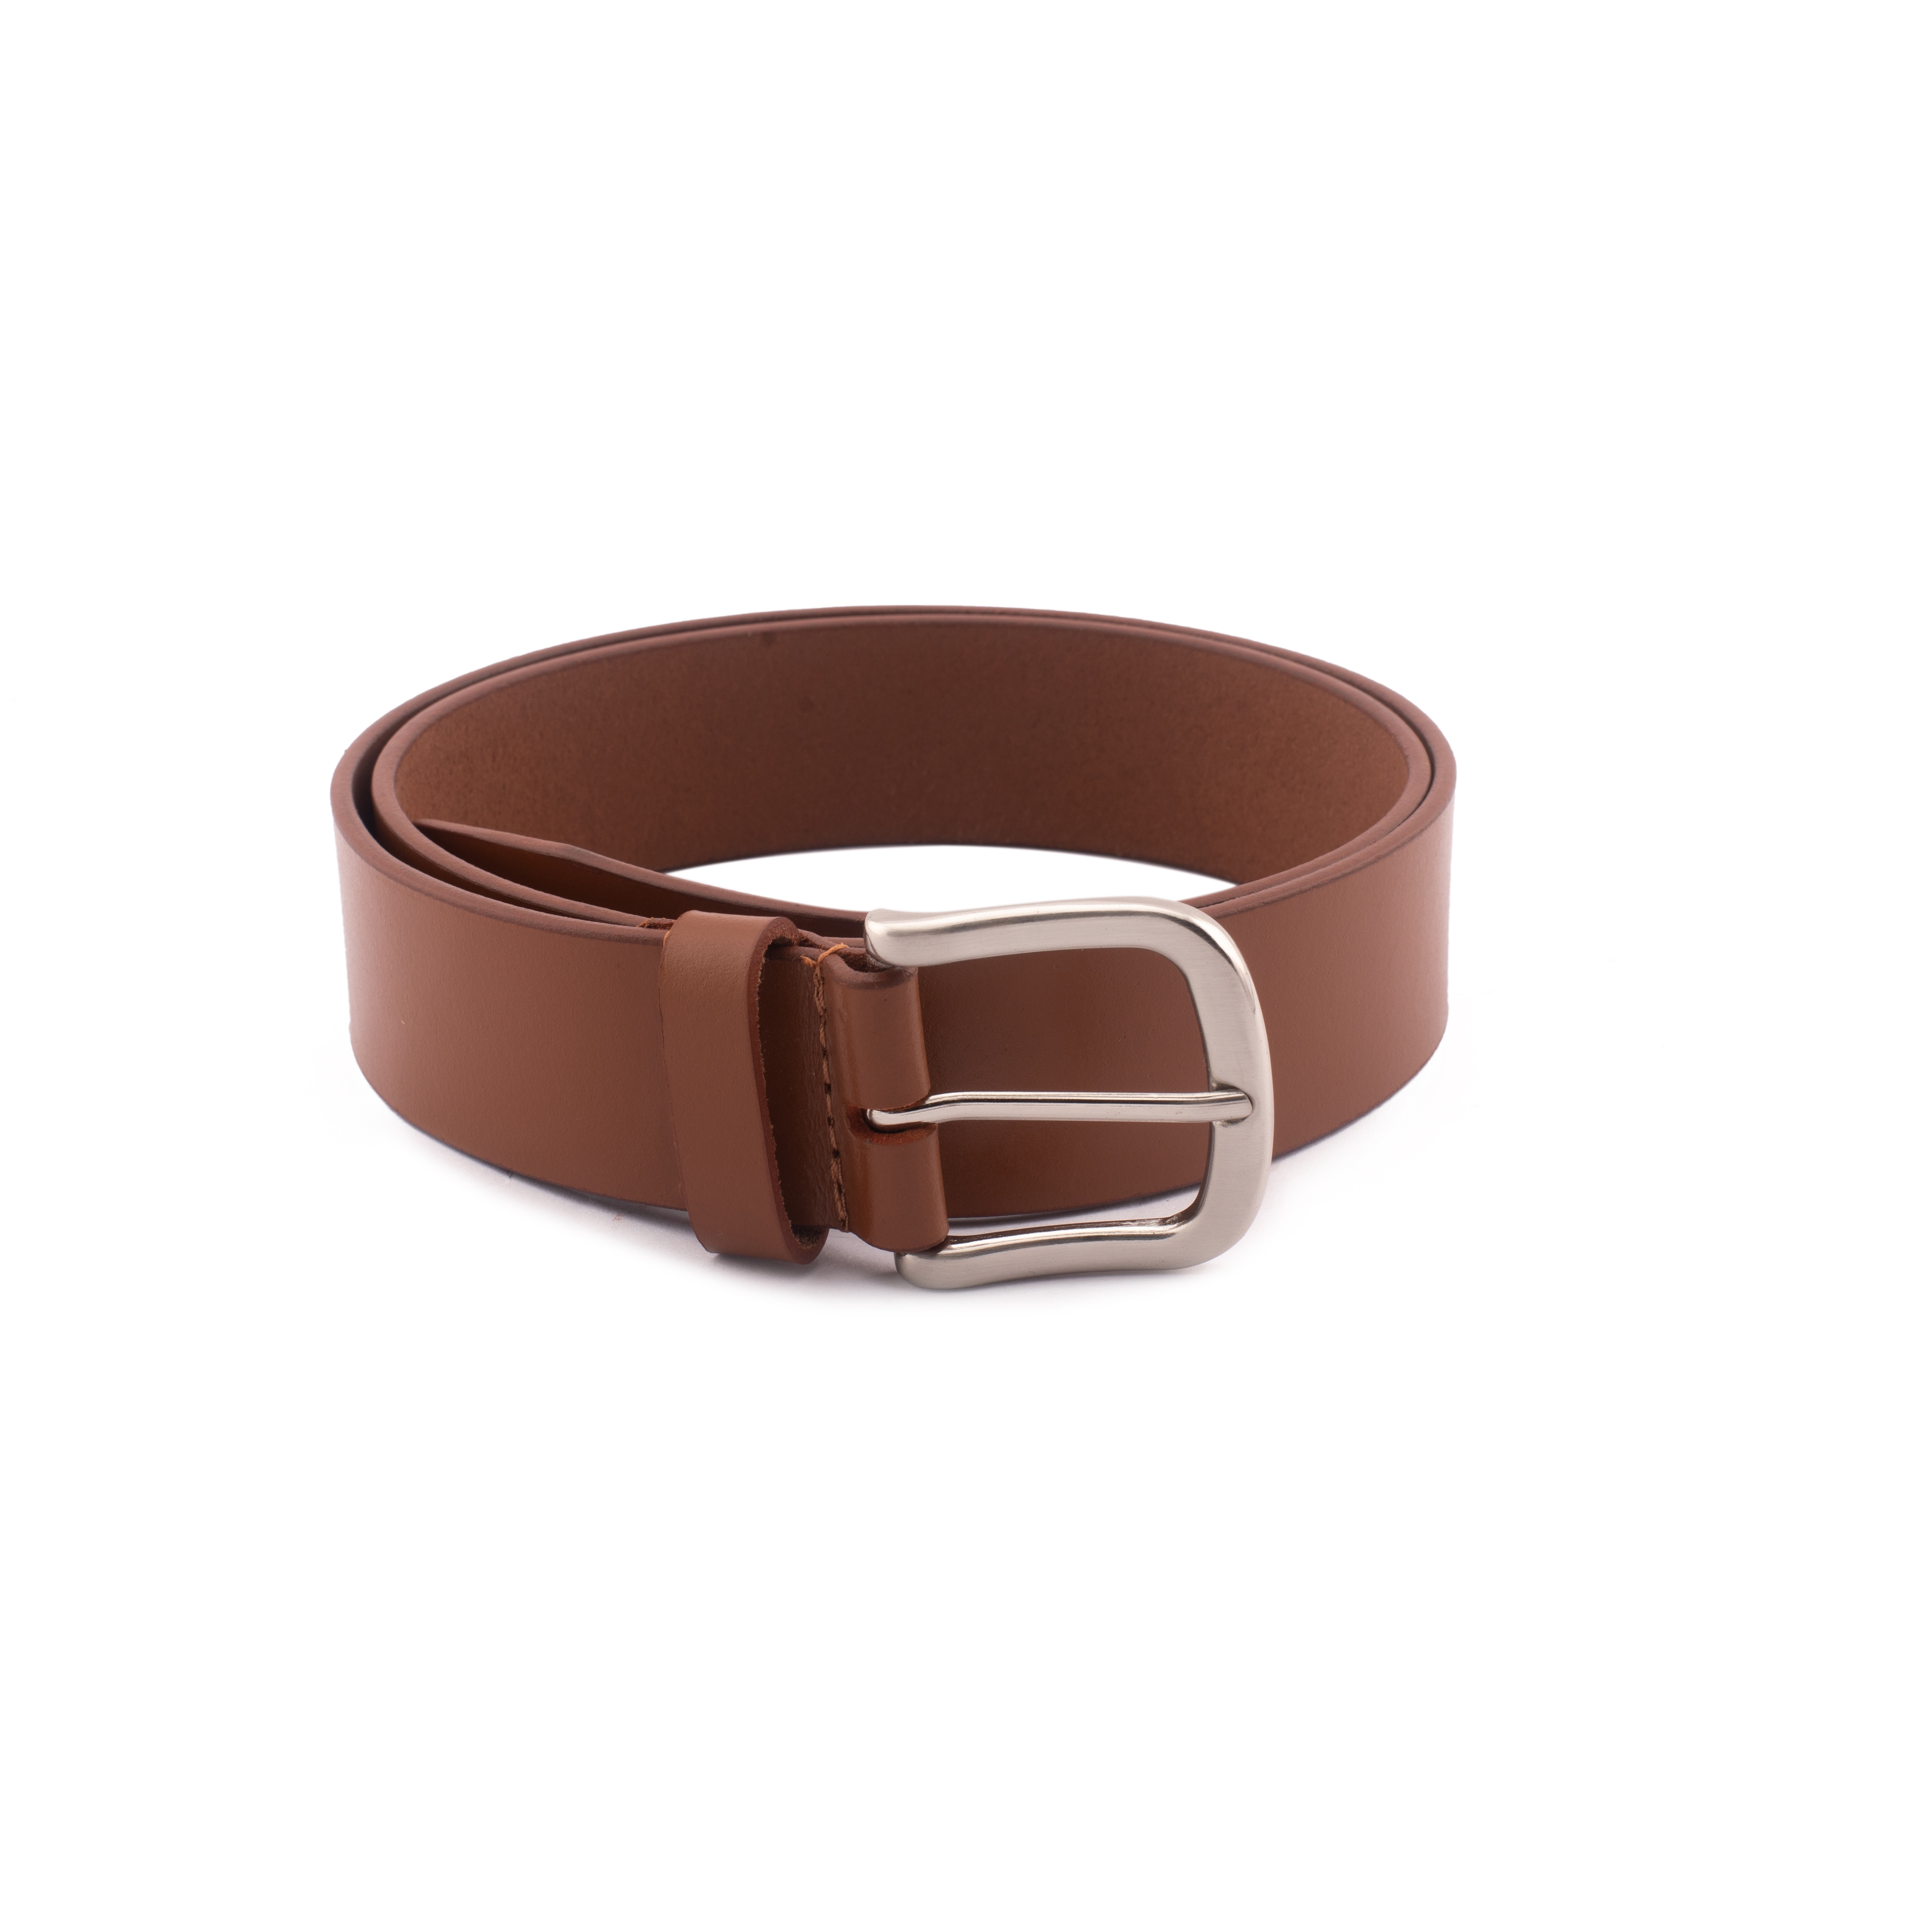 TOM LANG LONDON MENS REAL LEATHER BELT WITH METAL BUCKLE CLOSURE